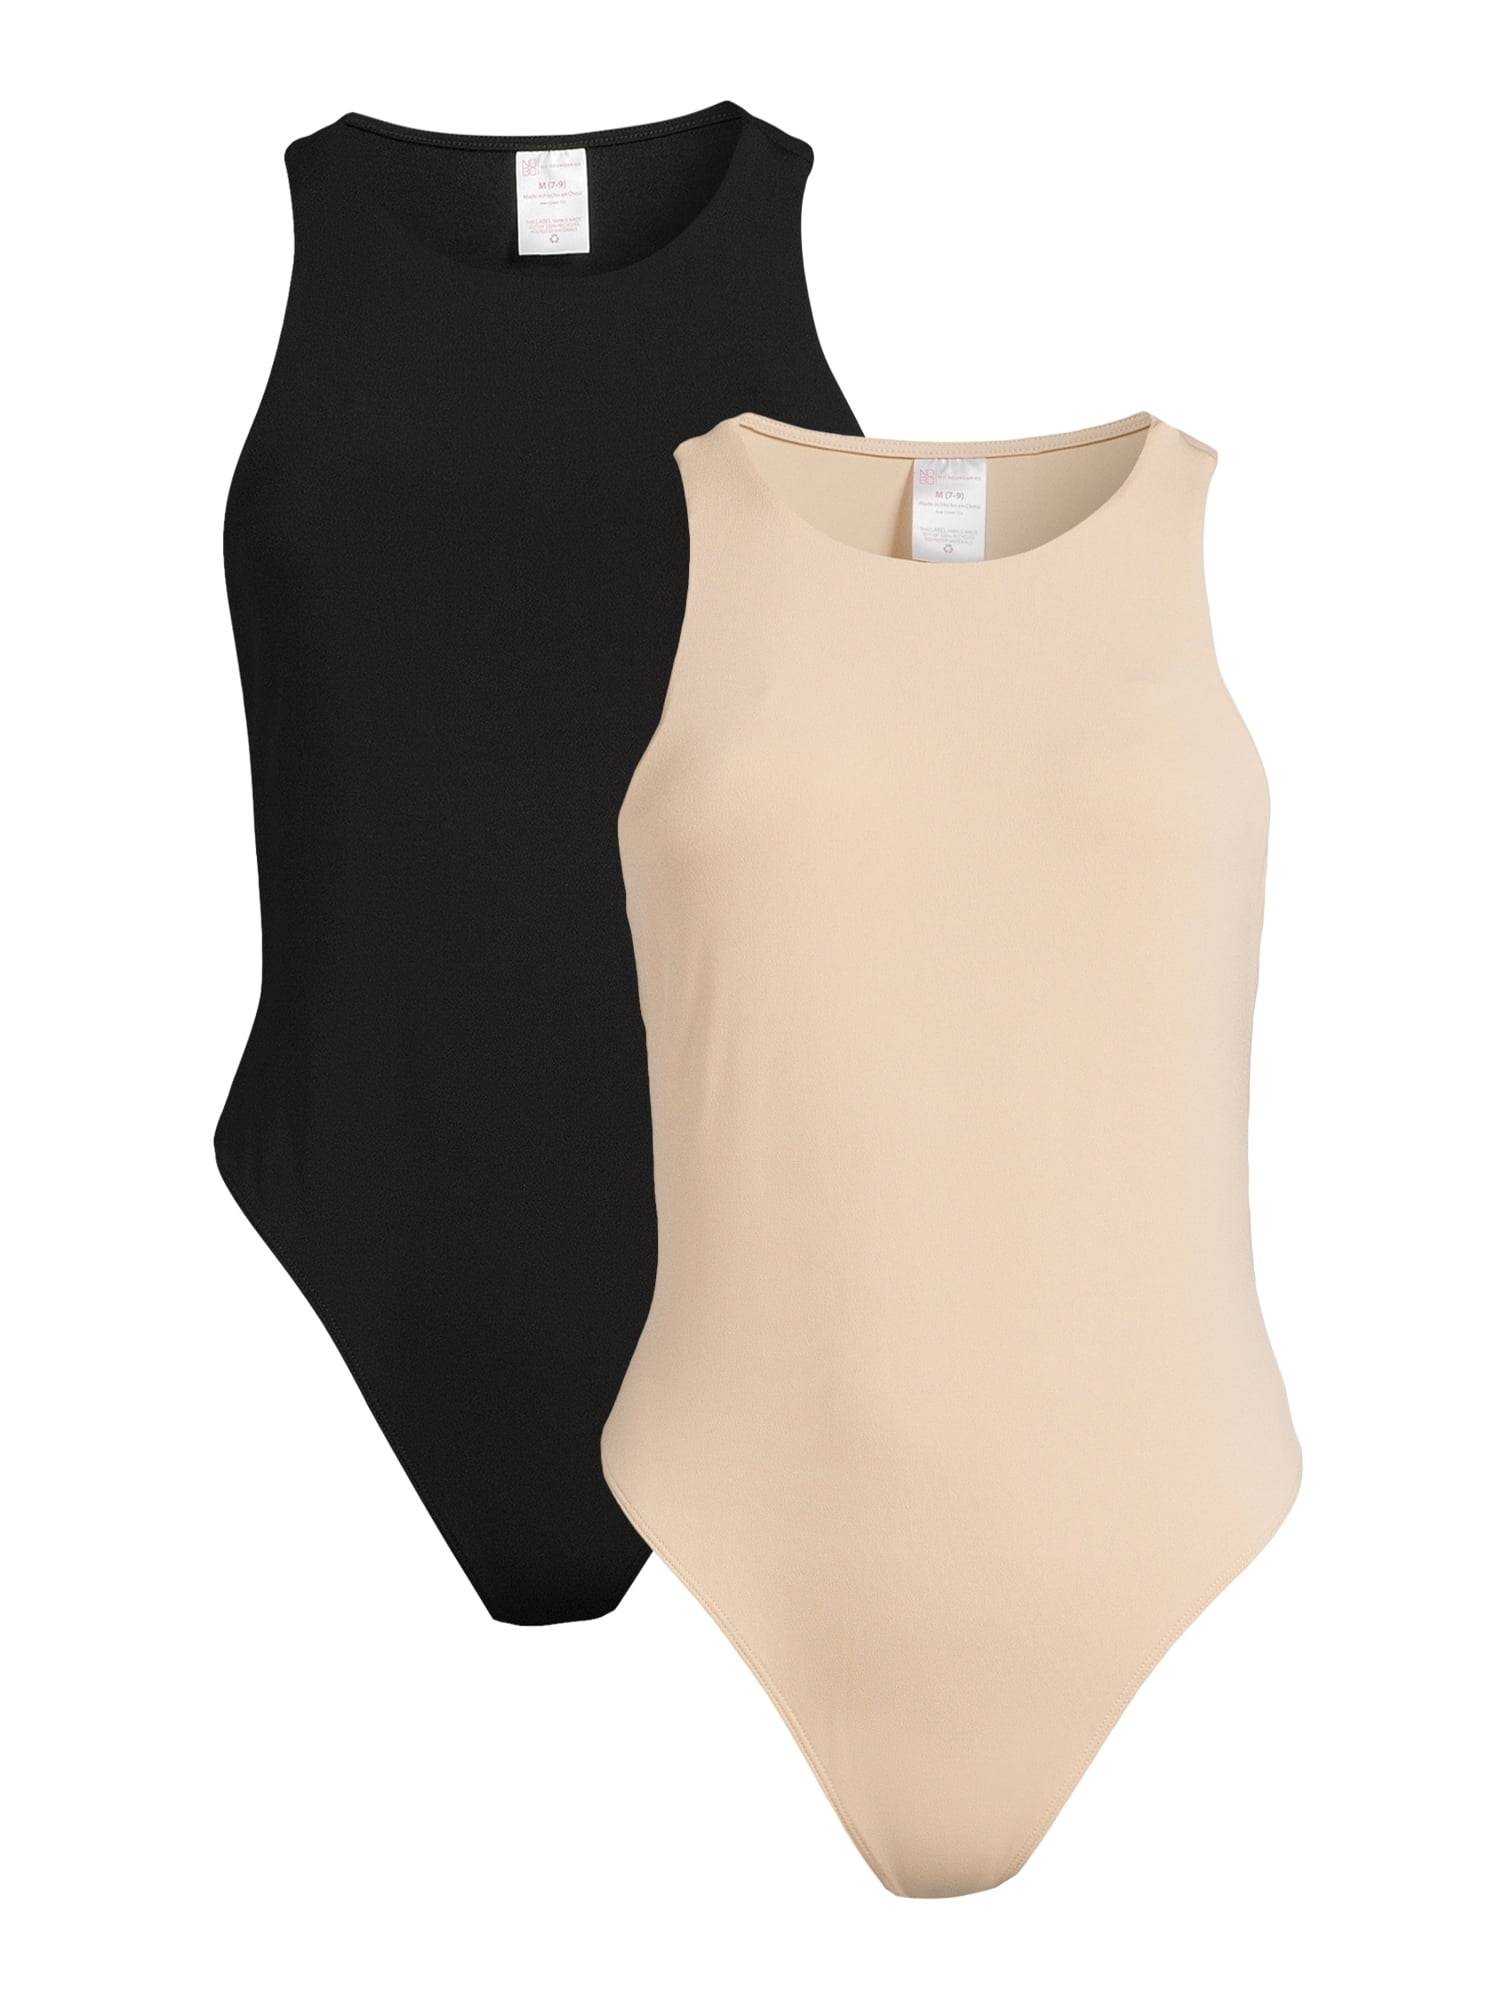 My favorite Skims inspired bodysuit is available in a 3-pack